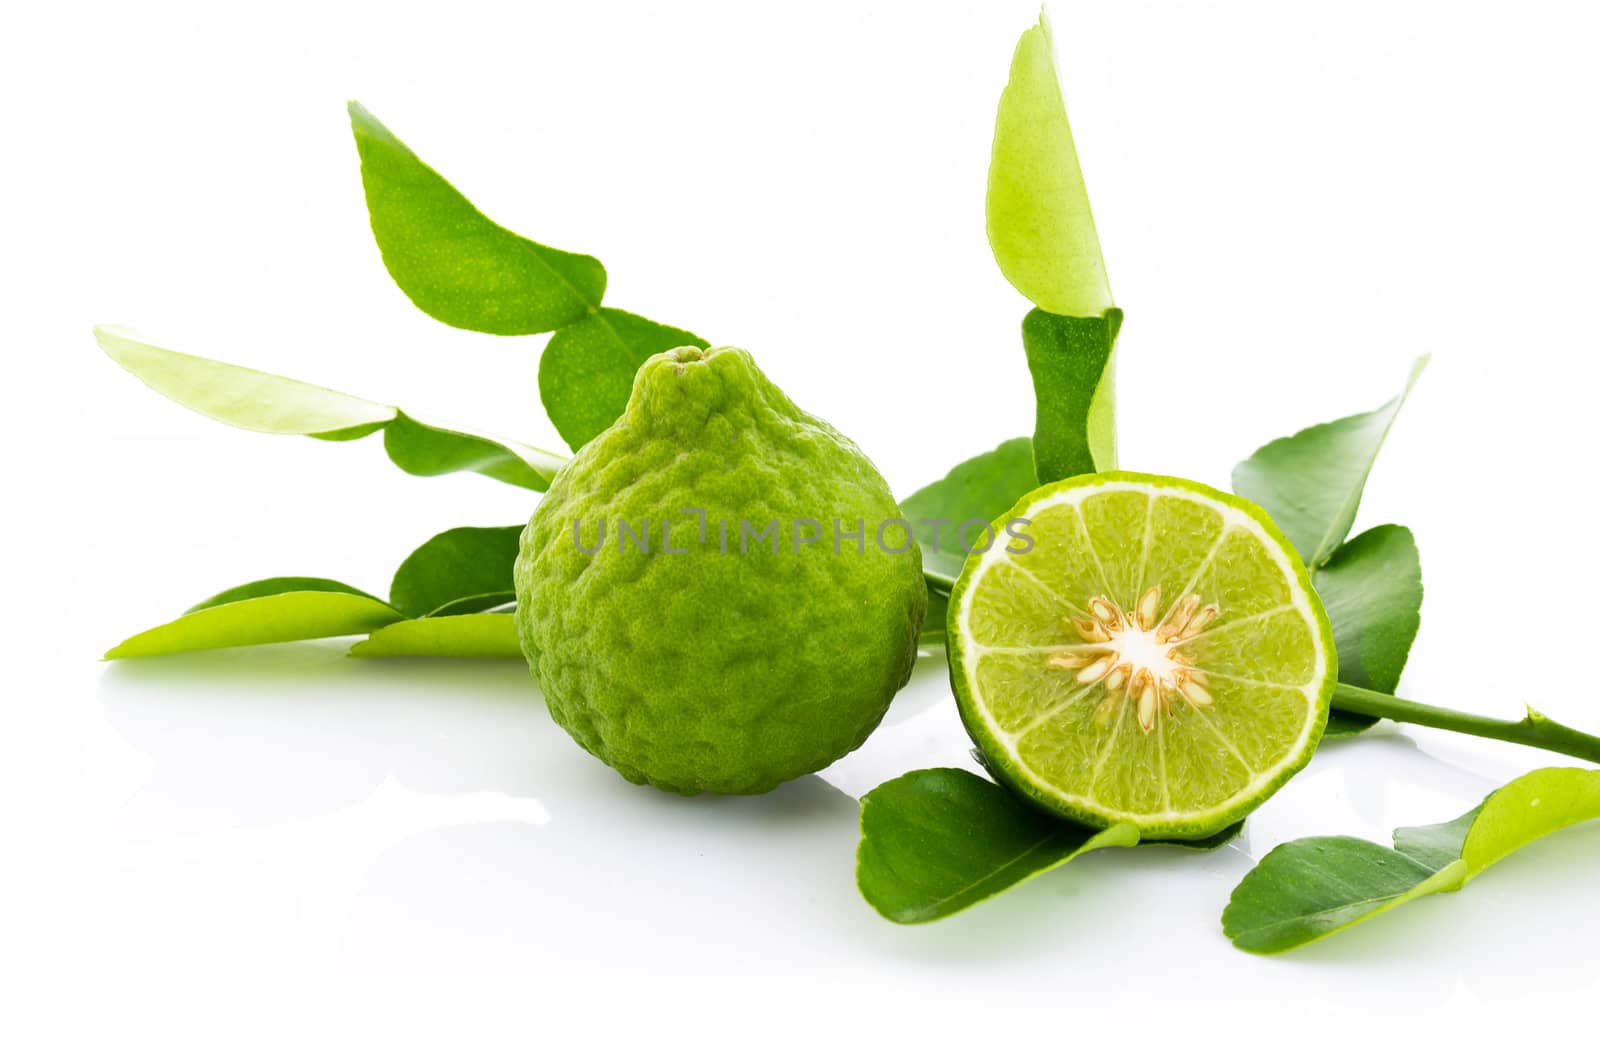 Kaffir lime fresh and leaf isolated on white background.